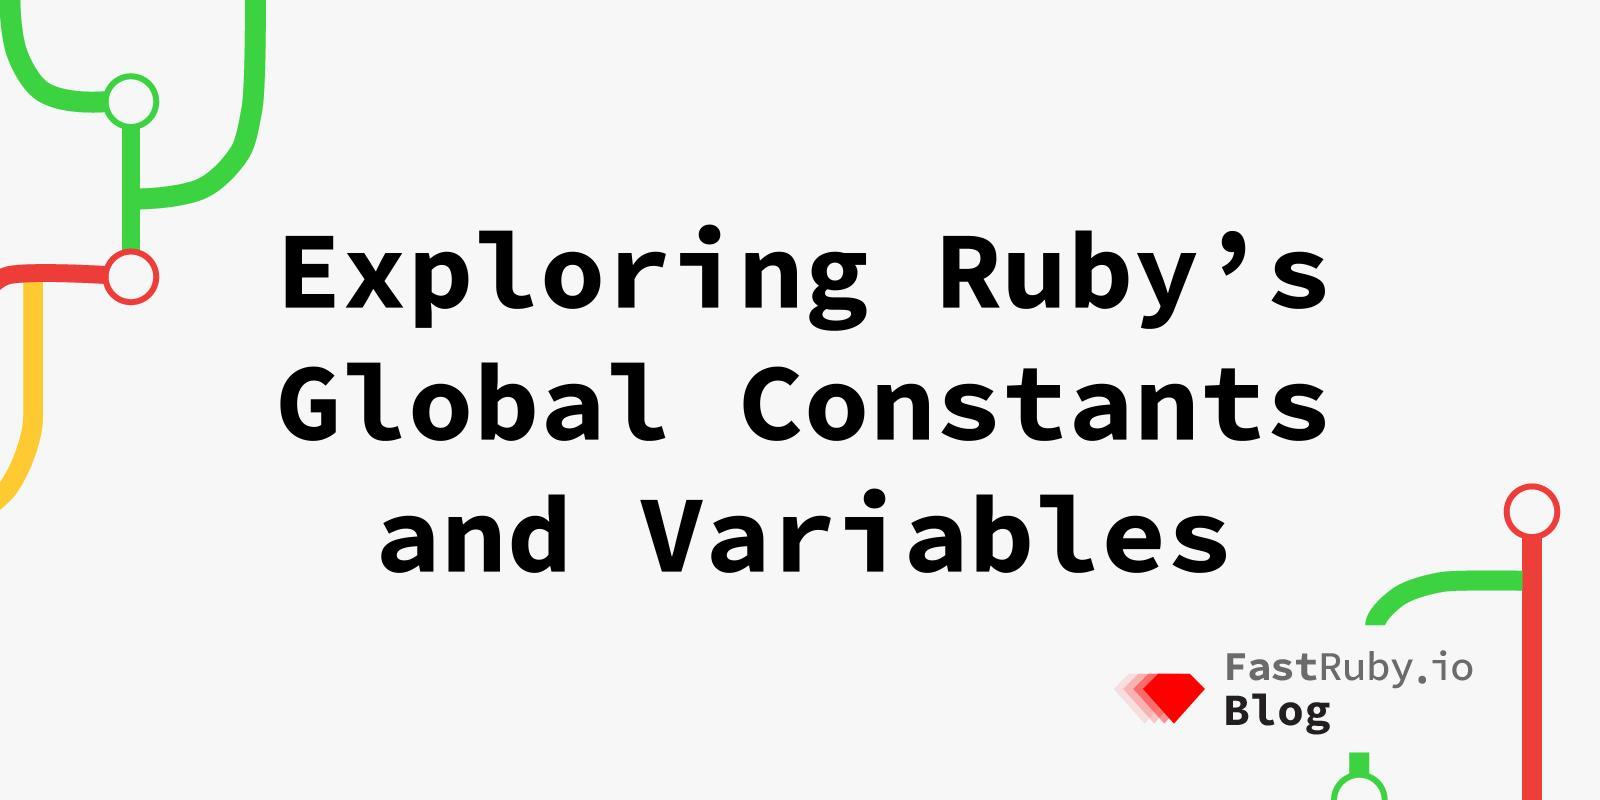 Exploring Ruby's Global Constants and Variables